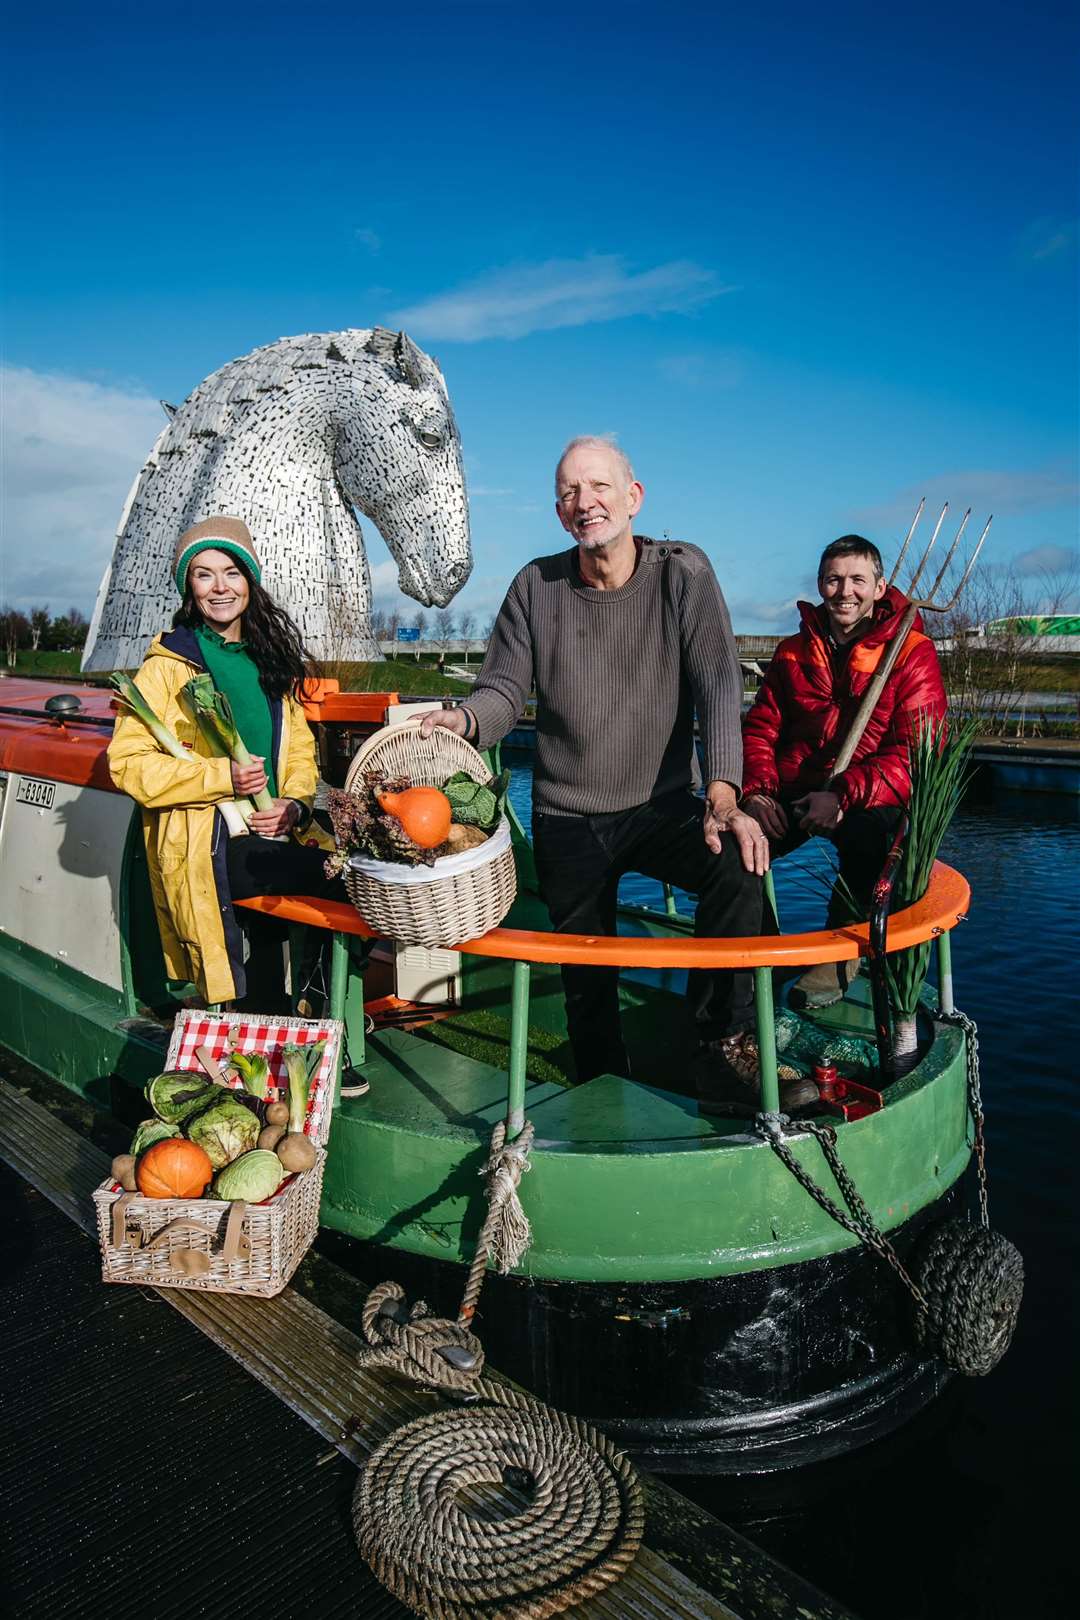 Events manager Yvonne Kincaid along with festivals and events director Neil Butler (centre) and Iain Withers, creative producer on the Marigold Sunrise canal boat, in front of the Kelpies in Falkirk.